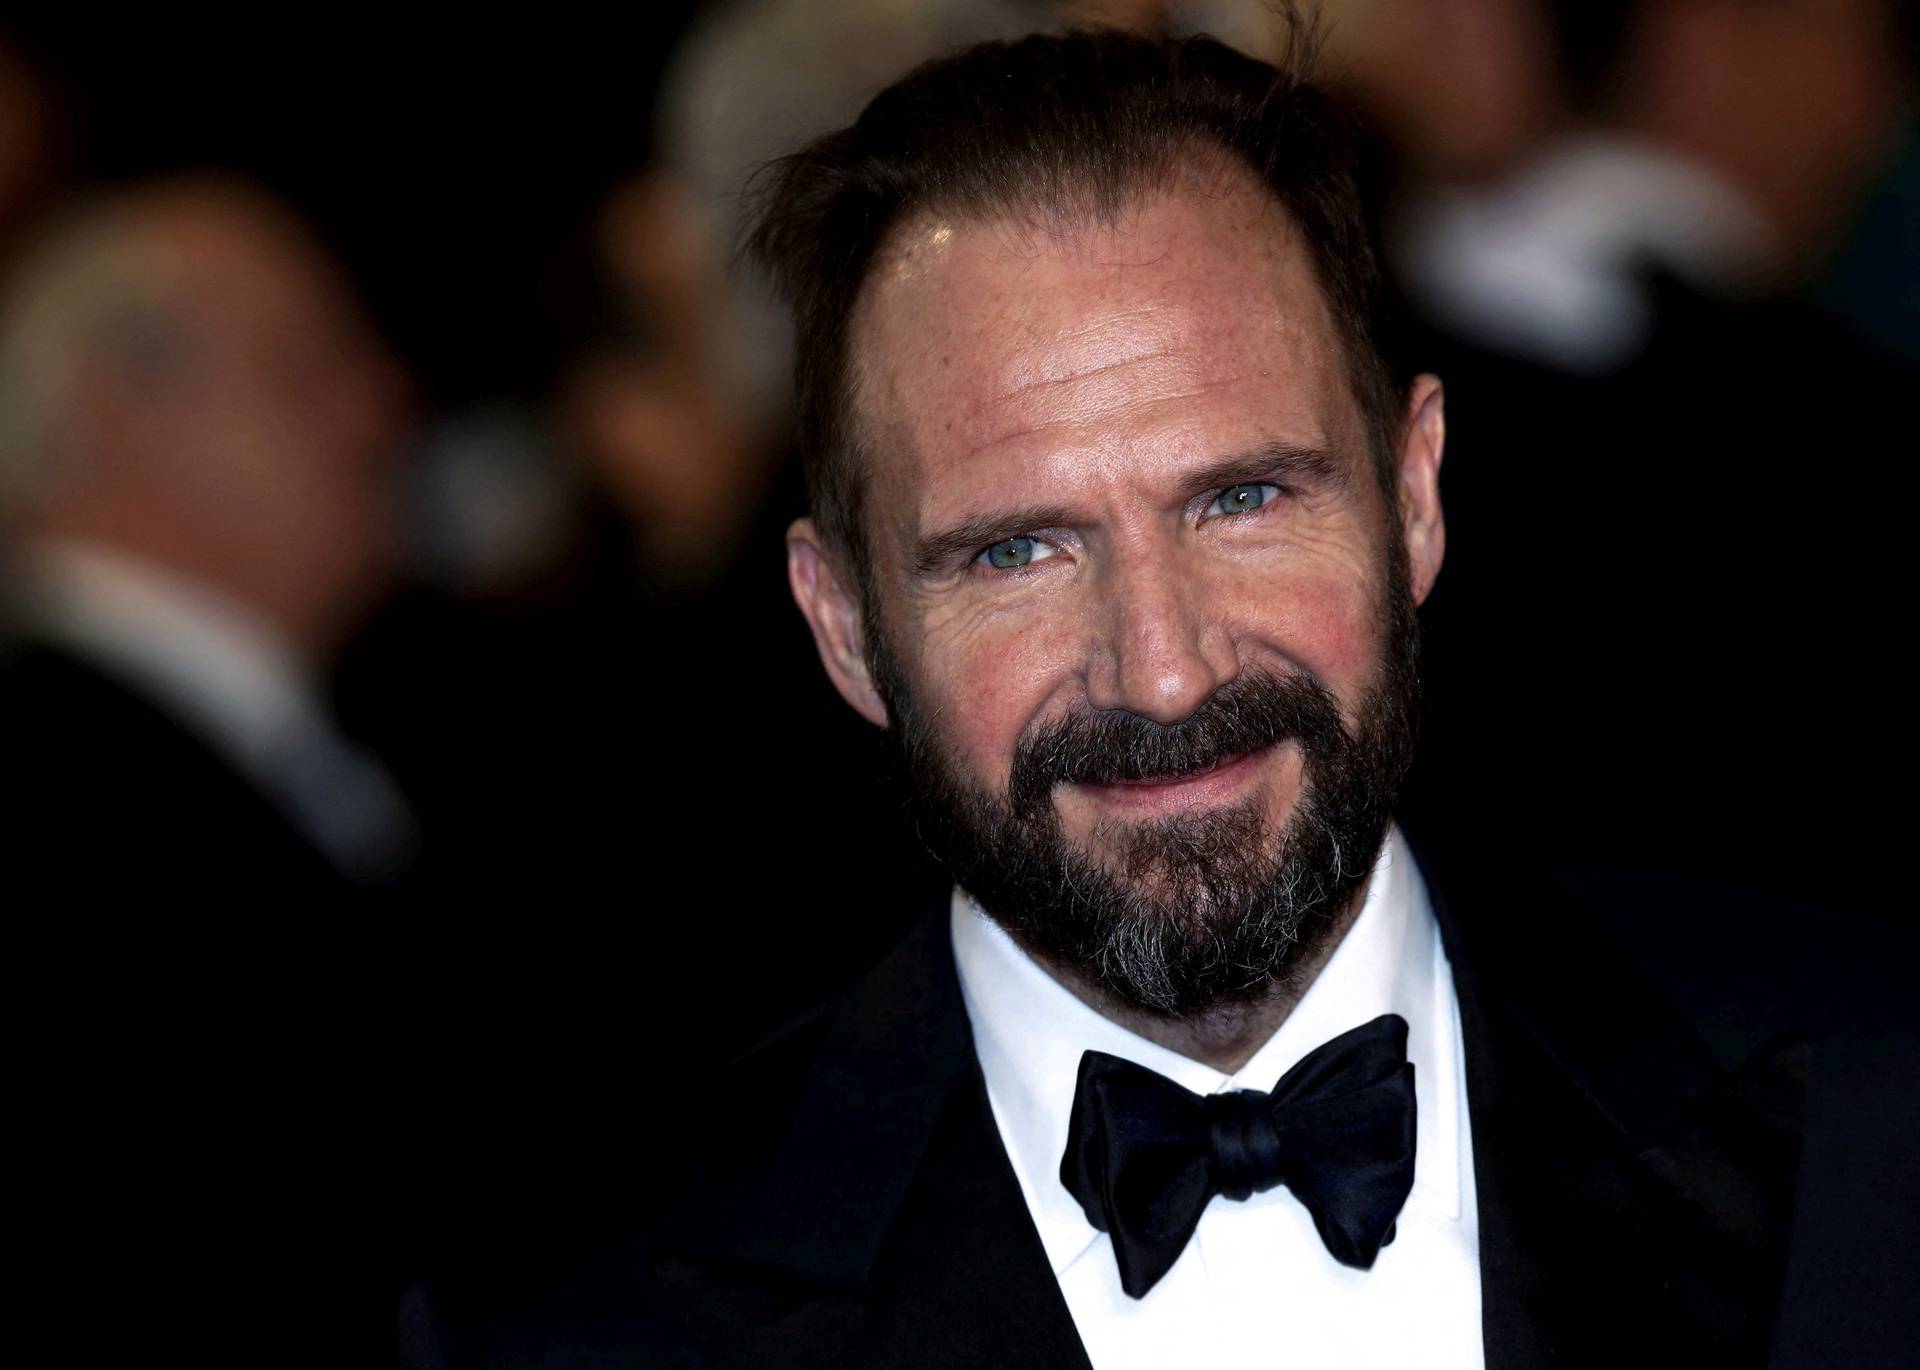 FILE PHOTO: Ralph Fiennes poses for photographers on the red carpet at the world premiere of the new James Bond 007 film "Spectre" at the Royal Albert Hall in London